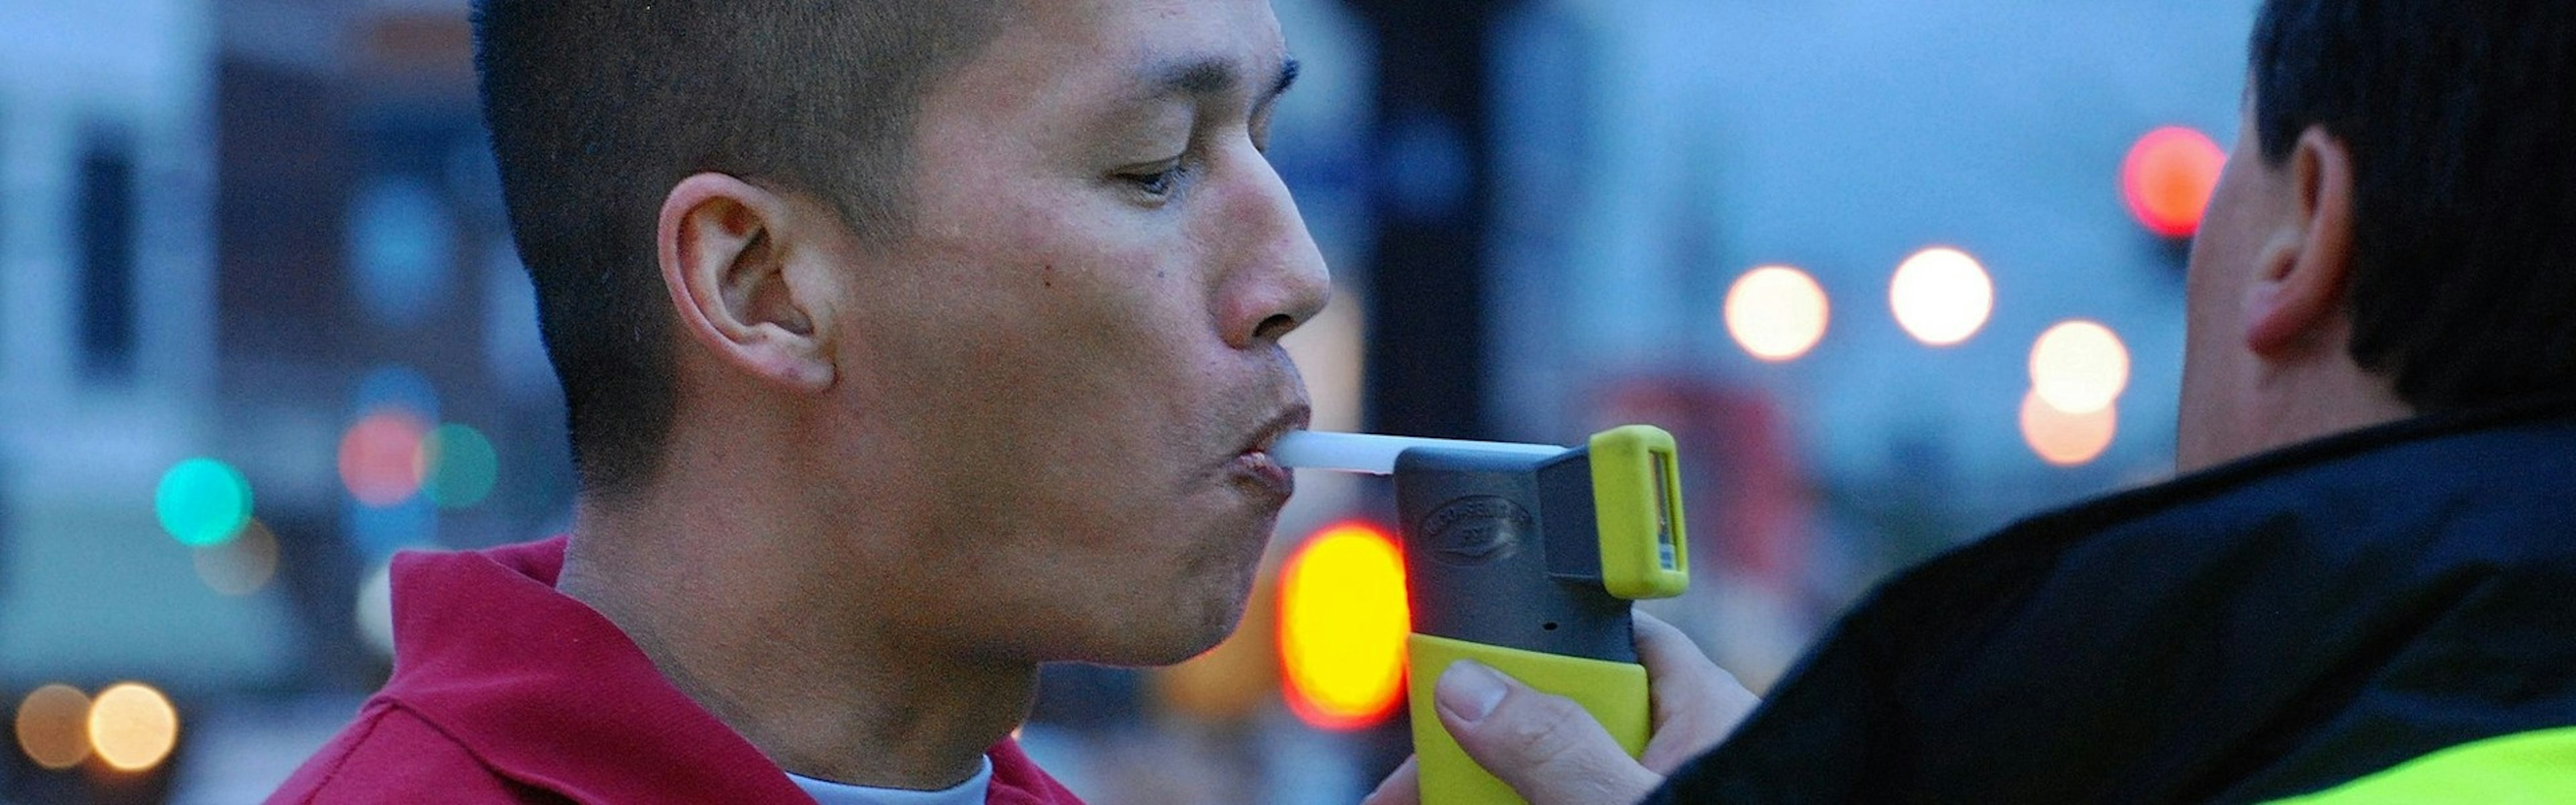 Cover Image for Is It Bad Advice To Refuse A Breathalyzer?